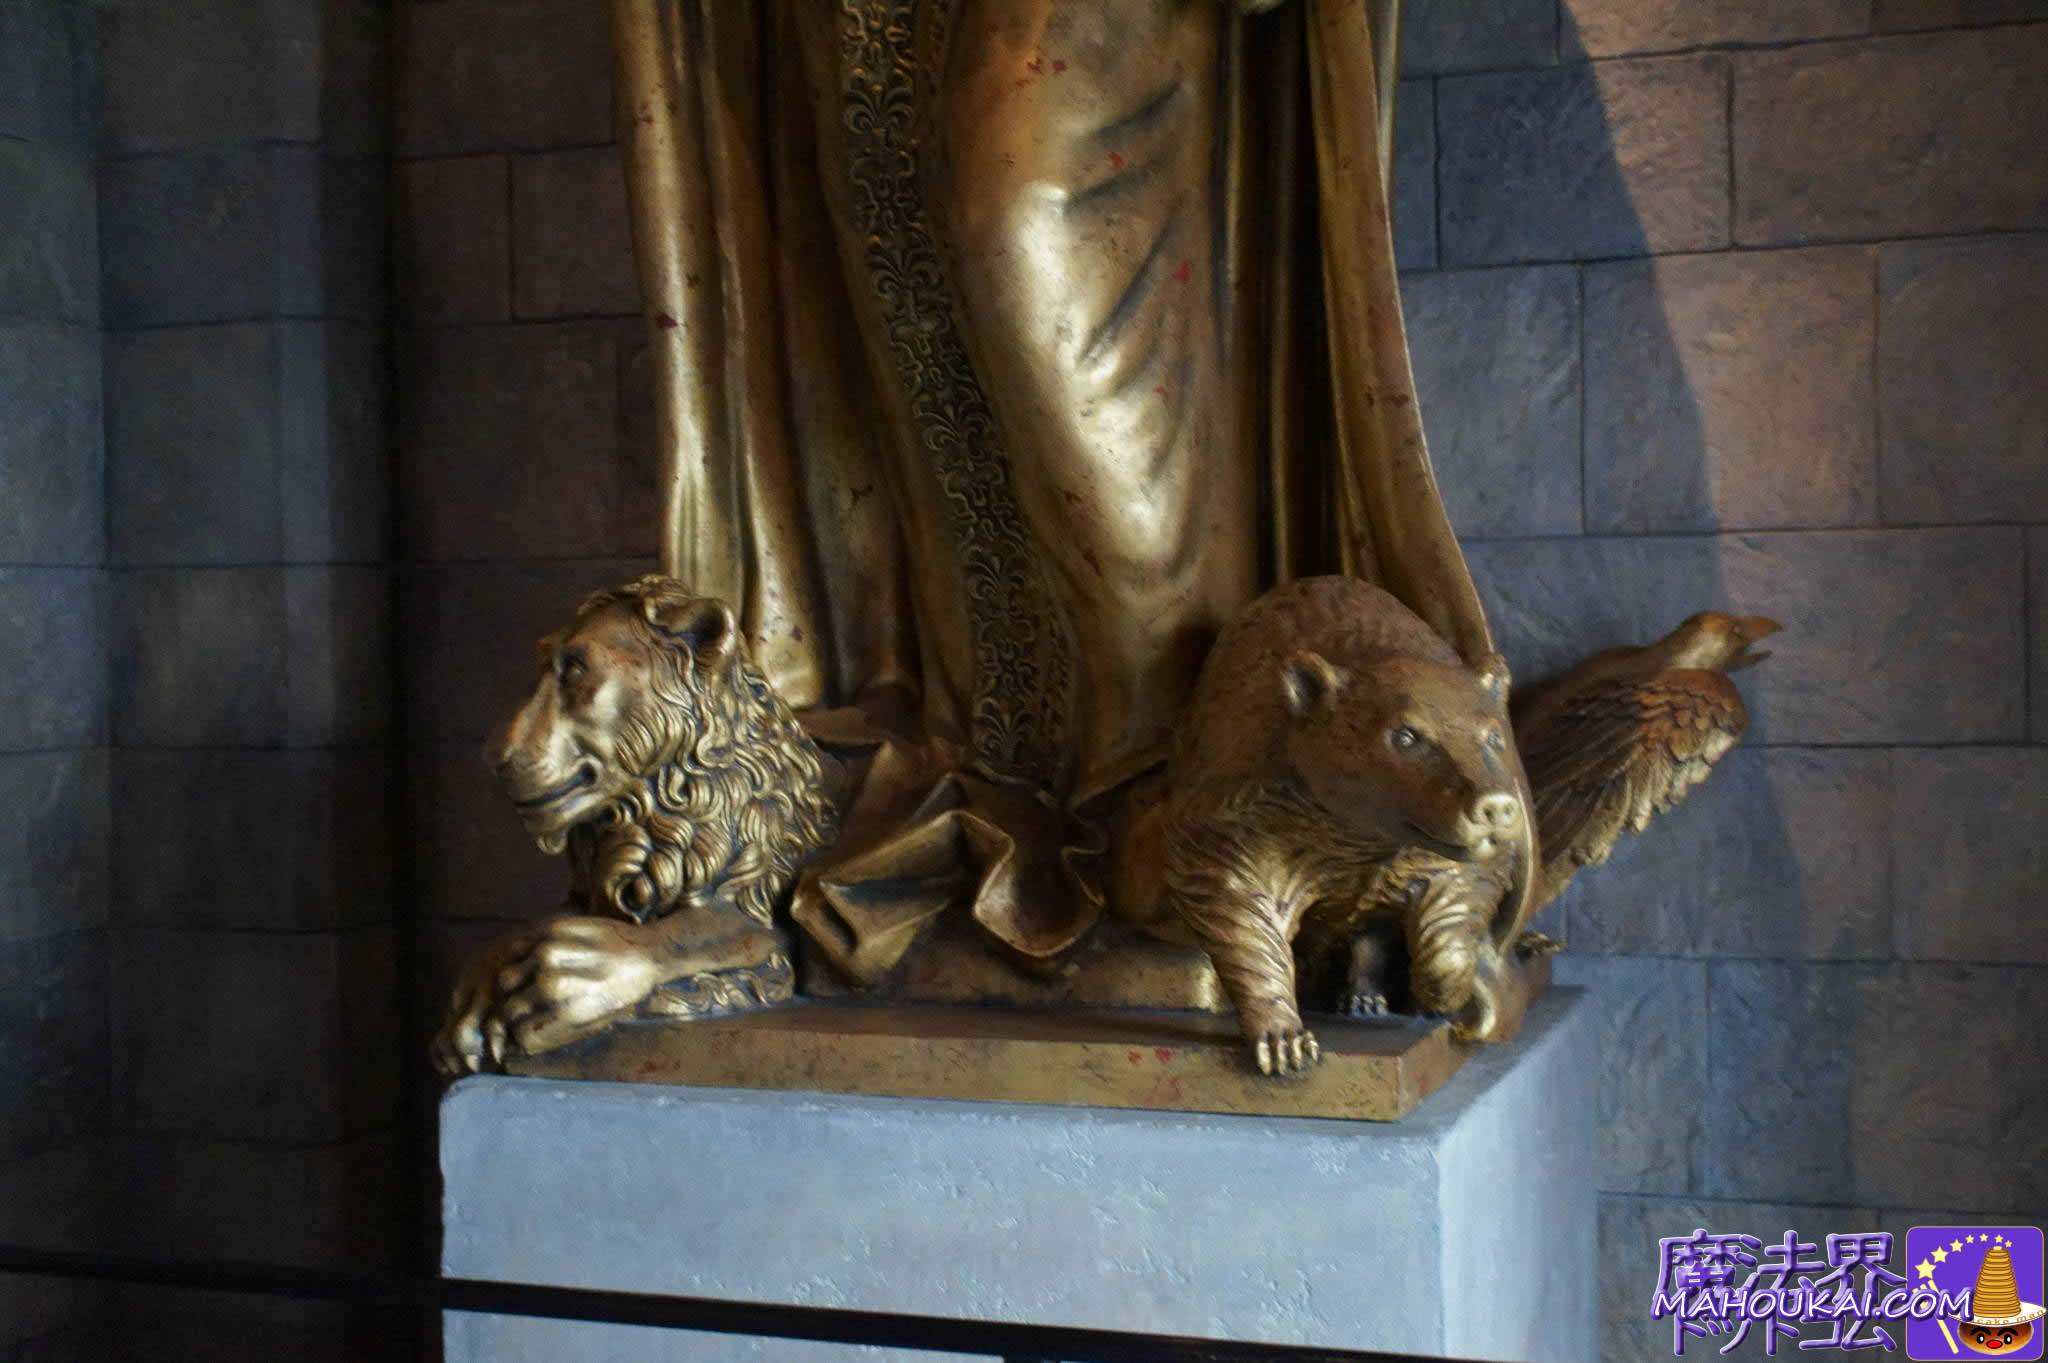 At the foot of the statue of the Hogwarts architect is the symbolic animal of the four dormitories USJ 'Harry Potter Area' Hogwarts Castle Walk